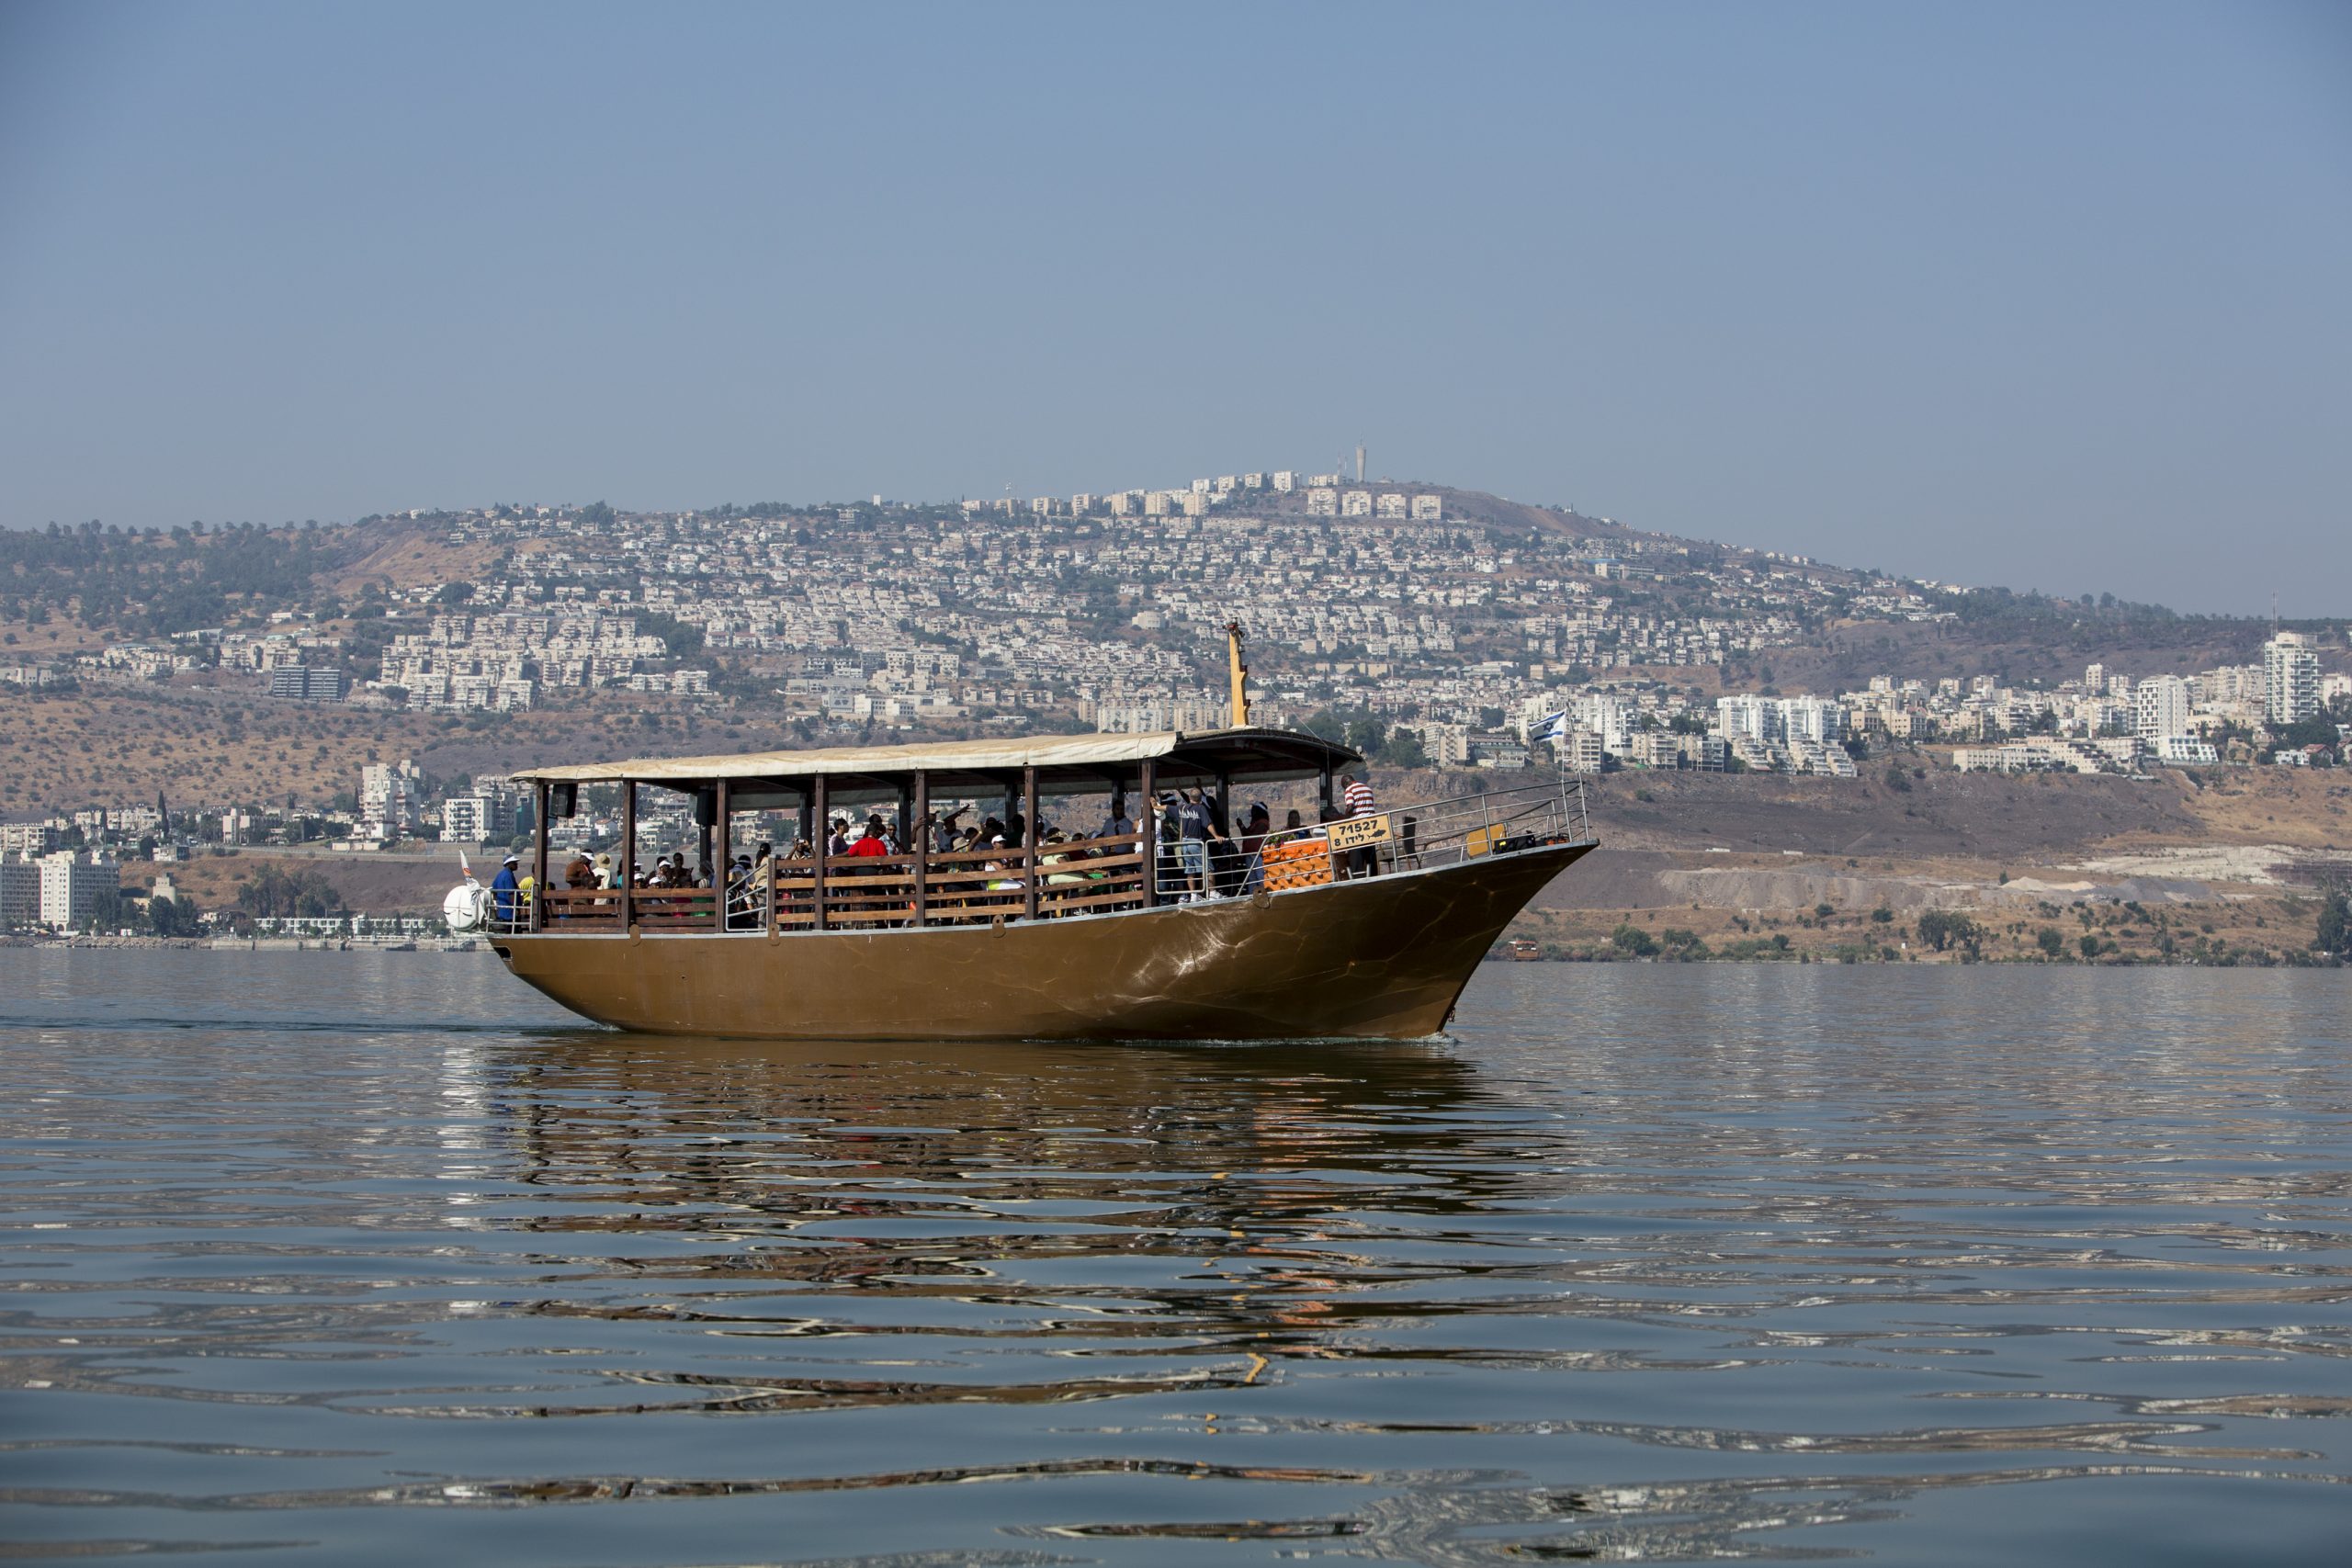 Tiberias  is a city on the western shore of the Sea of Galilee in the Lower Galilee. Established in 20 CE, it was named in honour of the emperor Tiberius.Tiberias has been venerated in Judaism since the middle of the 2nd century CE and since the 16th century has been considered one of Judaism's Four Holy Cities, along with Jerusalem, Hebron and Safed.In the 2nd-10th centuries, Tiberias was the largest Jewish city in the Galilee and the political and religious hub of the Jews of Palestine. According to Christian tradition, Jesus performed several miracles in the Tiberias district, making it an important pilgrimage site for Christians. Tiberias has historically been known for its hot springs, believed to cure skin and other ailments, for thousands of years.The picture shows a Pilgrim' s boat on the lake. Photo by Itamar Grinberg.